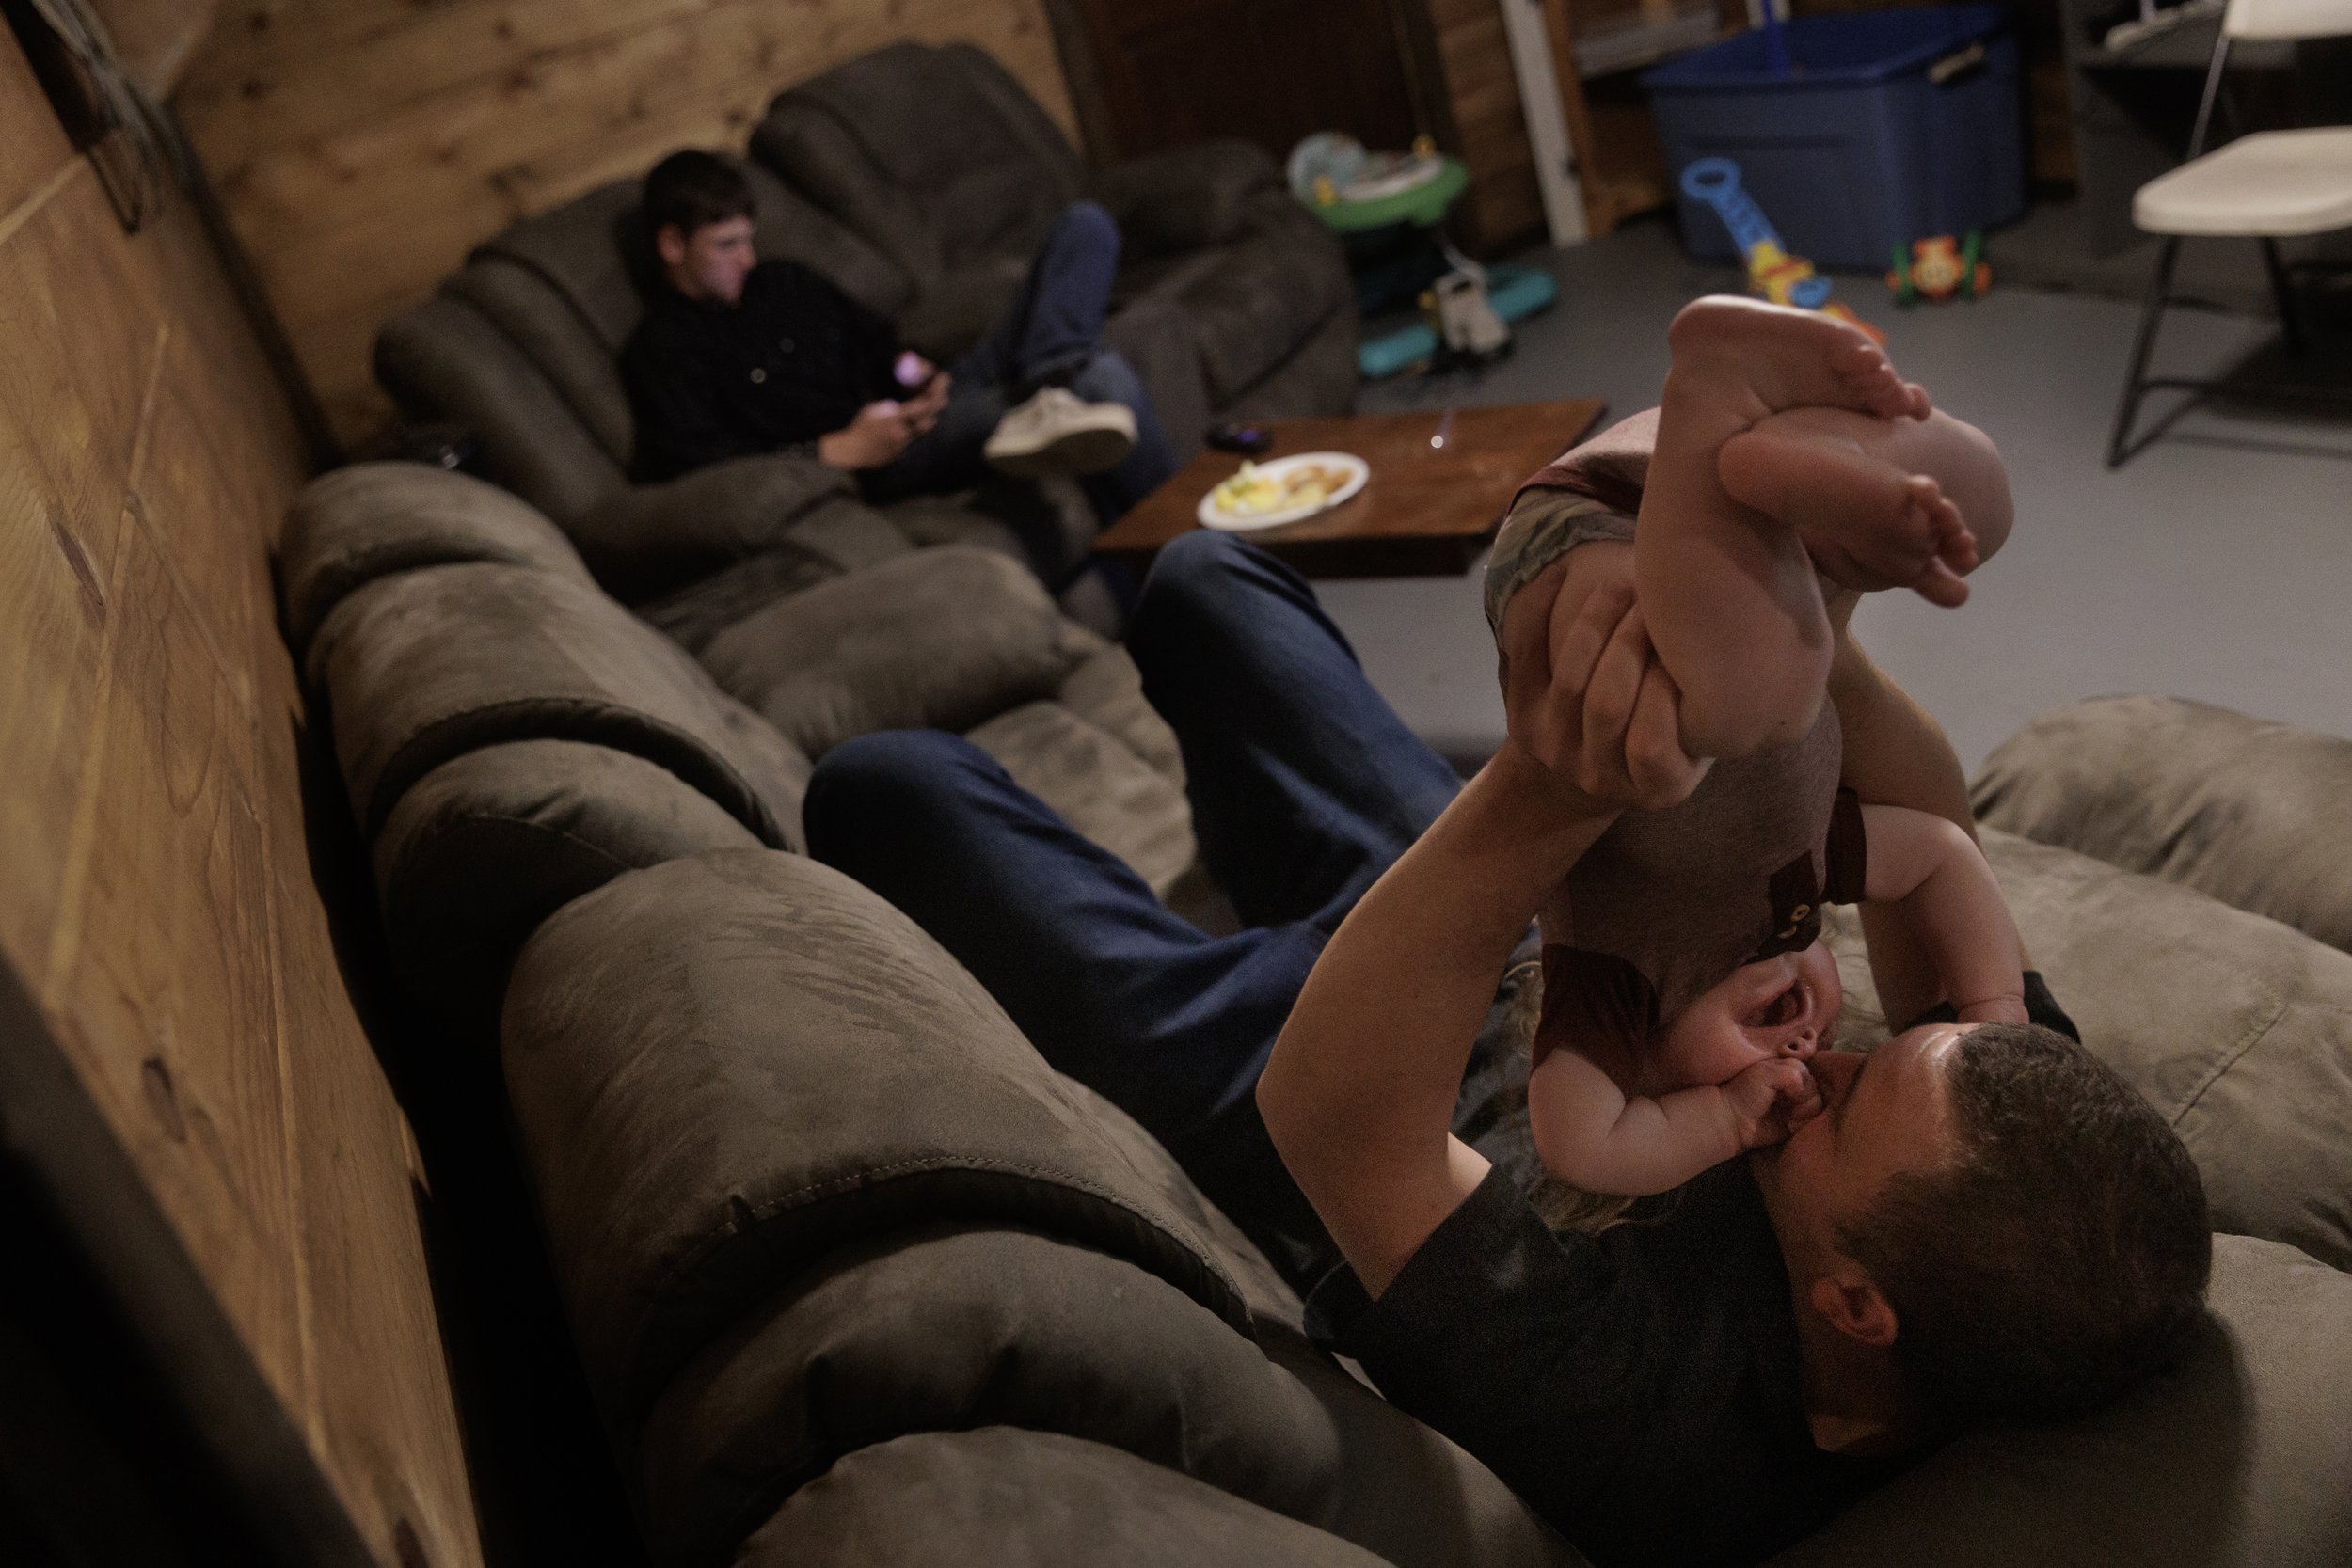  Miranda’s partner, Levi Langley, plays with their 9-month-old son Eros. Miranda and Levi, 25, moved back to Northeast Texas from Utah in December 2022. They’d just had their first child, Eros, and wanted to raise him and Miranda’s two other children